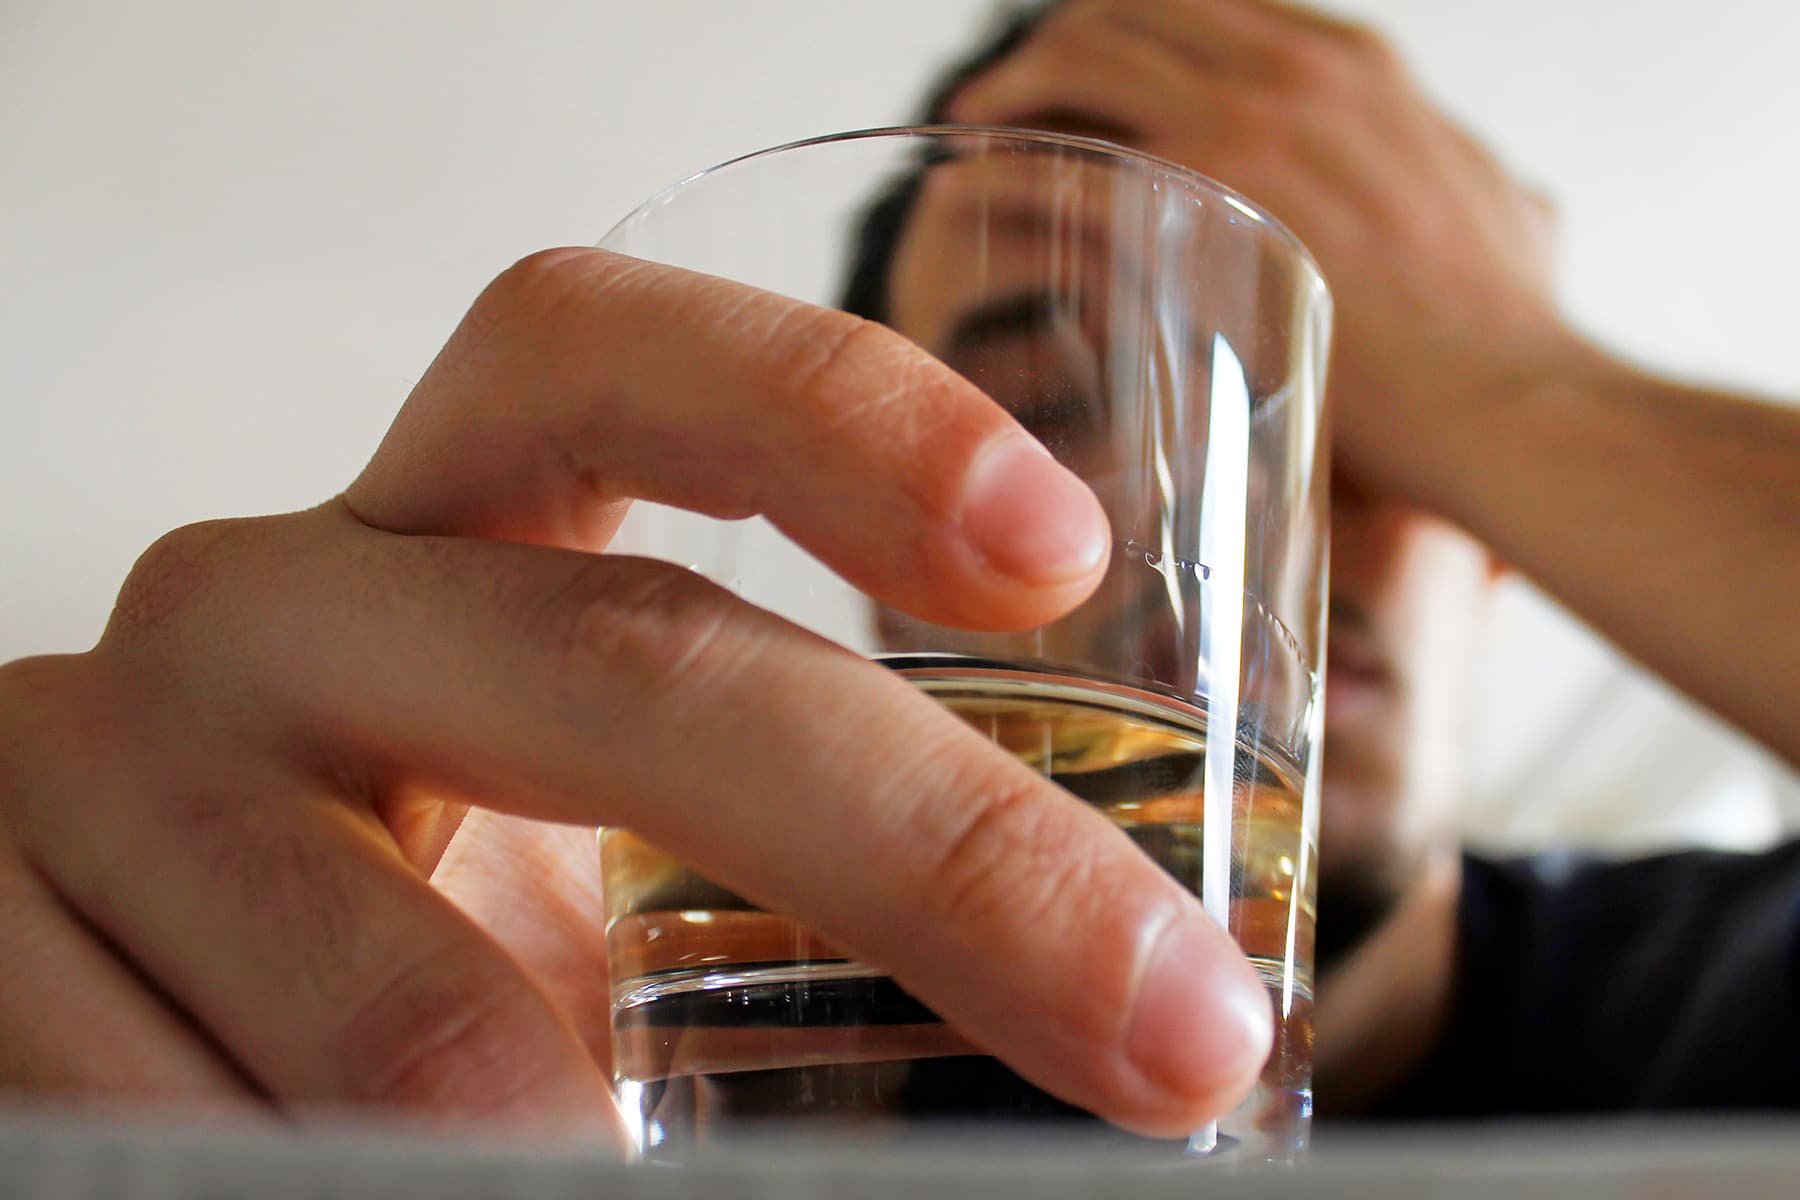 Few Americans Understand Alcohol’s Impact on Cancer Risk: Survey – WebMD